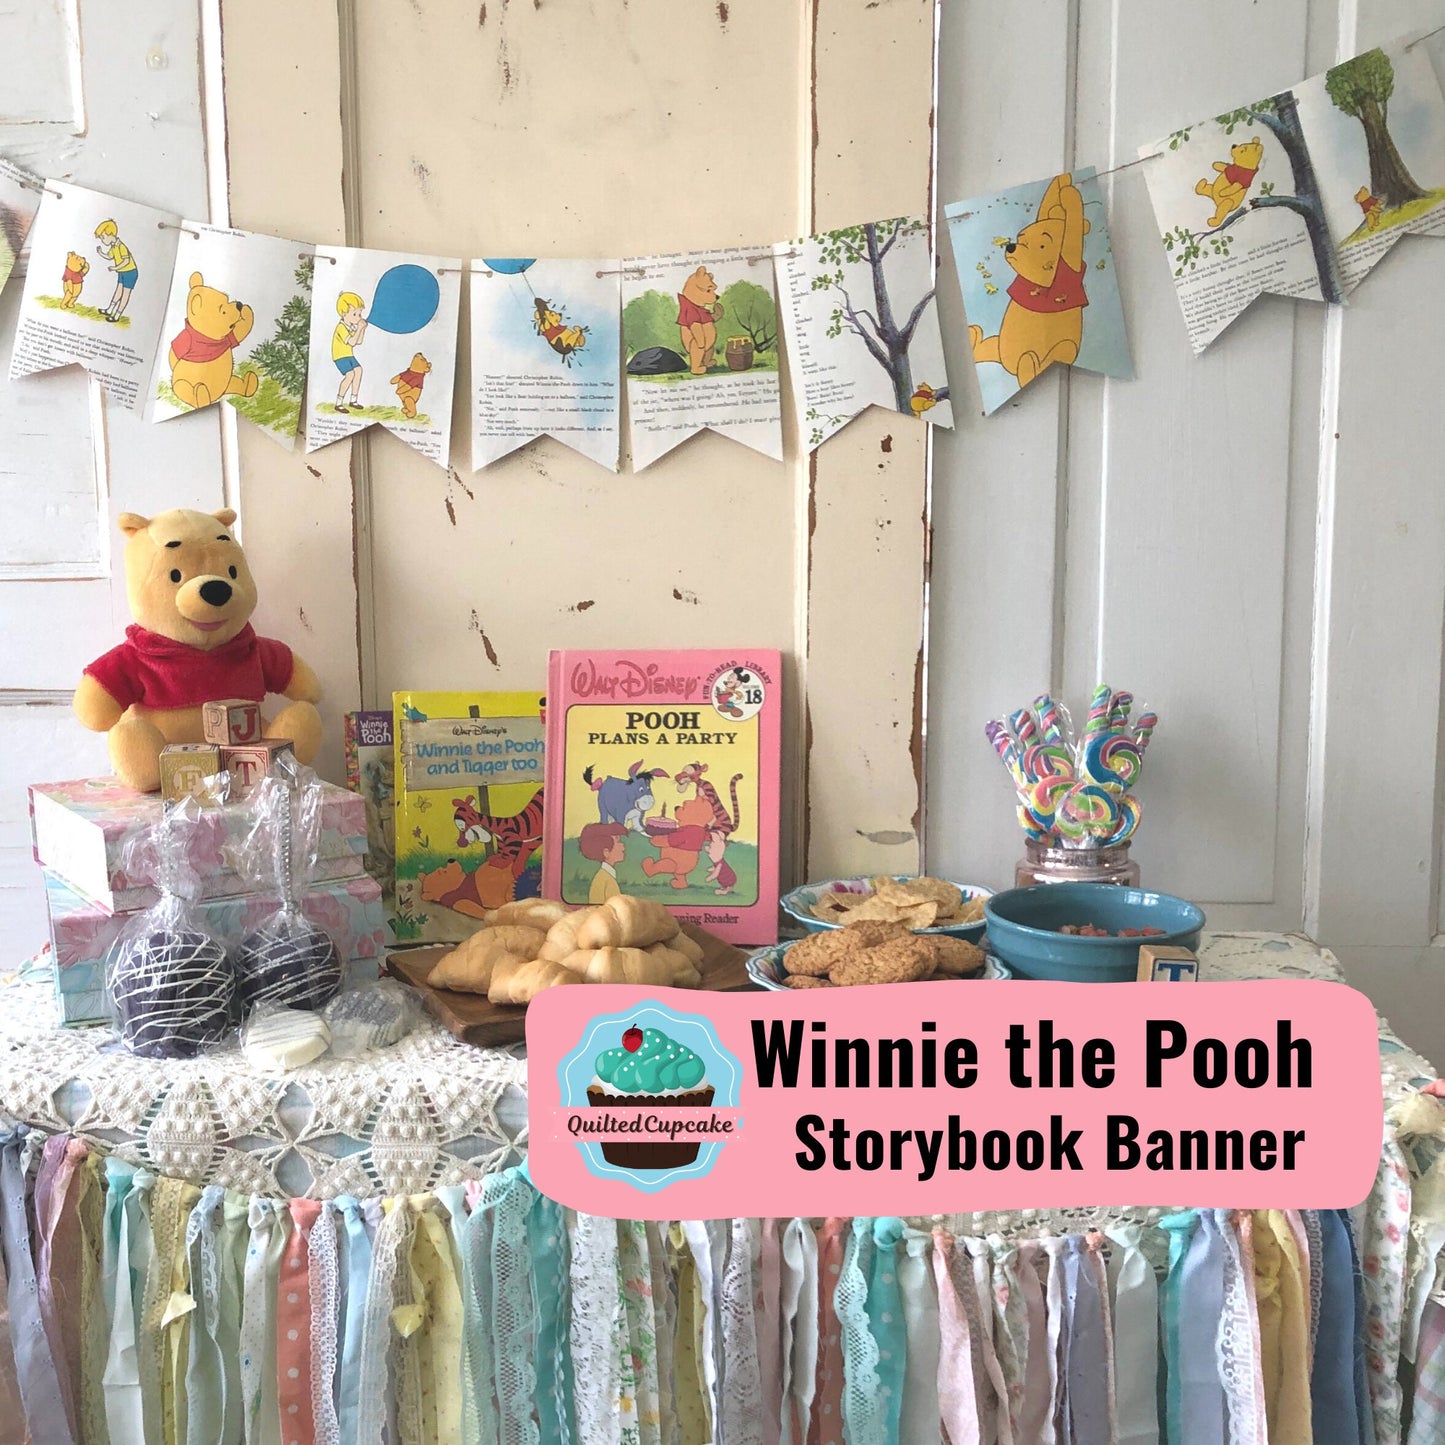 Winnie the Pooh Party/ Pooh Story Book Page Garland Banner. 6 ft backdrop for Baby Shower, Birthday Party, Nursery Decor/READY to SHIP